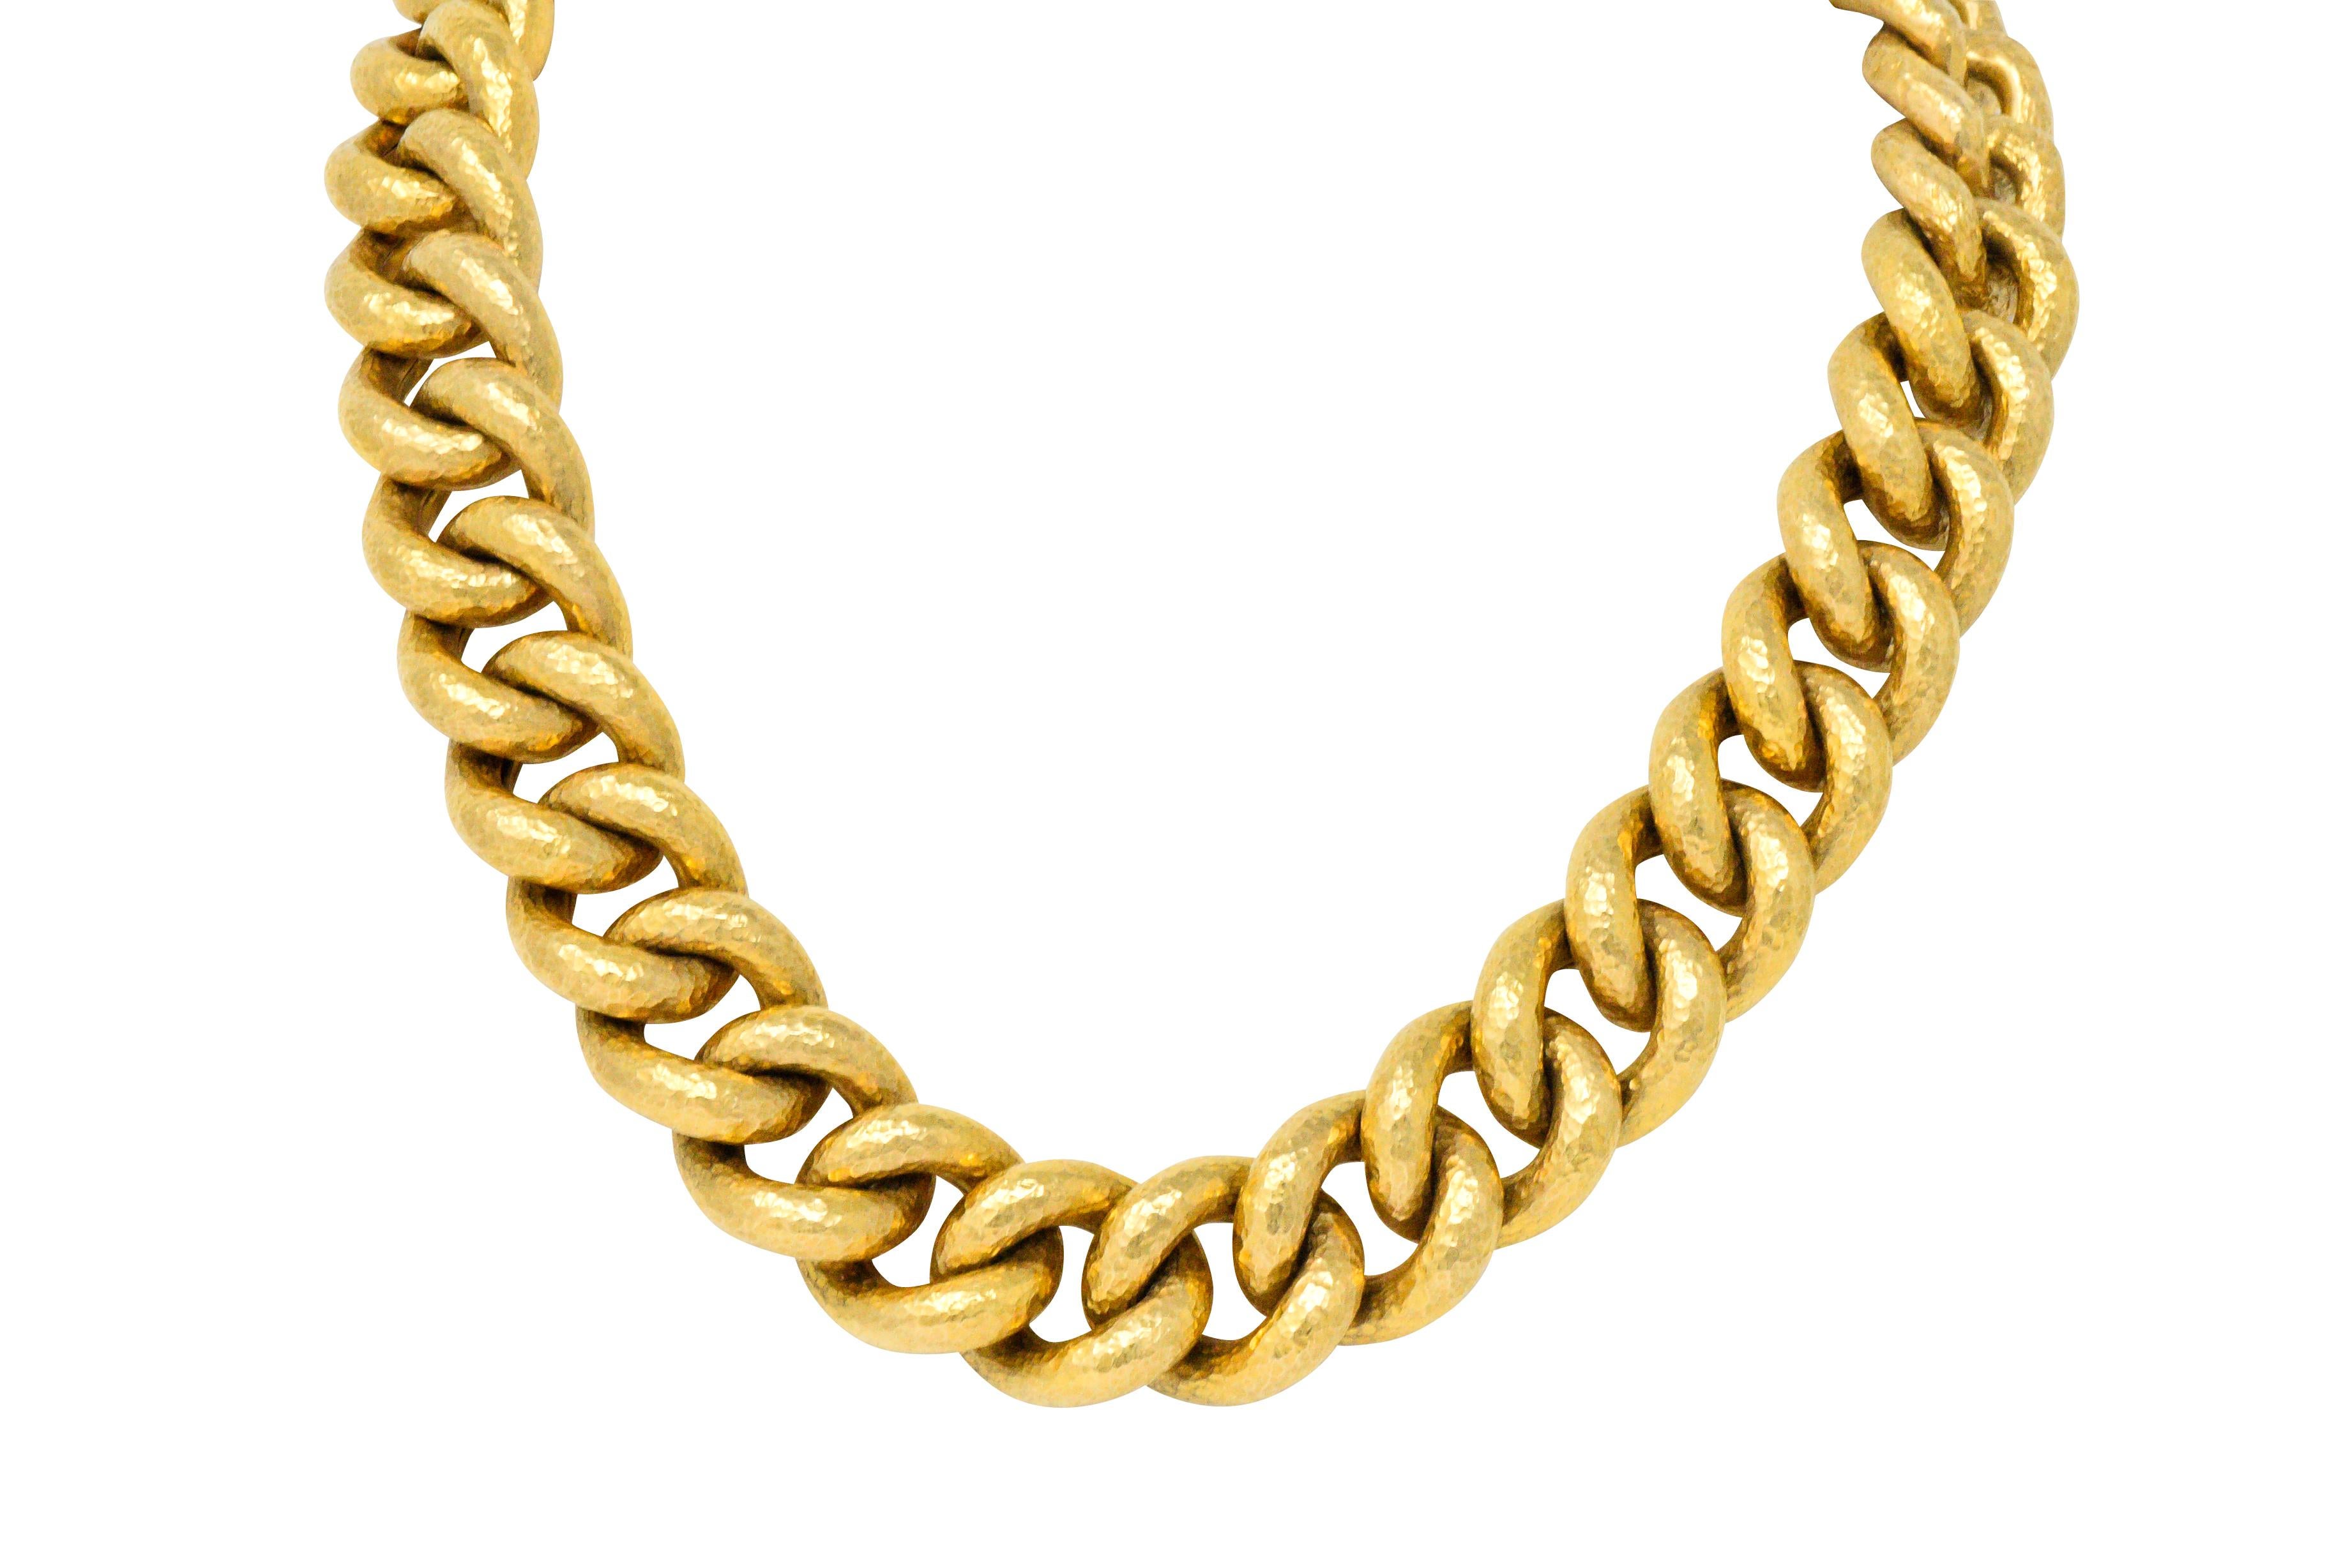 Hammered solid gold curb links

Concealed clasp with double figure-eight safety and maker's mark

Rich gold with a wonderful solid feel

Length: 18 Inches

Width: 3/4 Inch

Total Weight: 1989 Grams 

Mod. Lush. Glowing. 

We- 1443